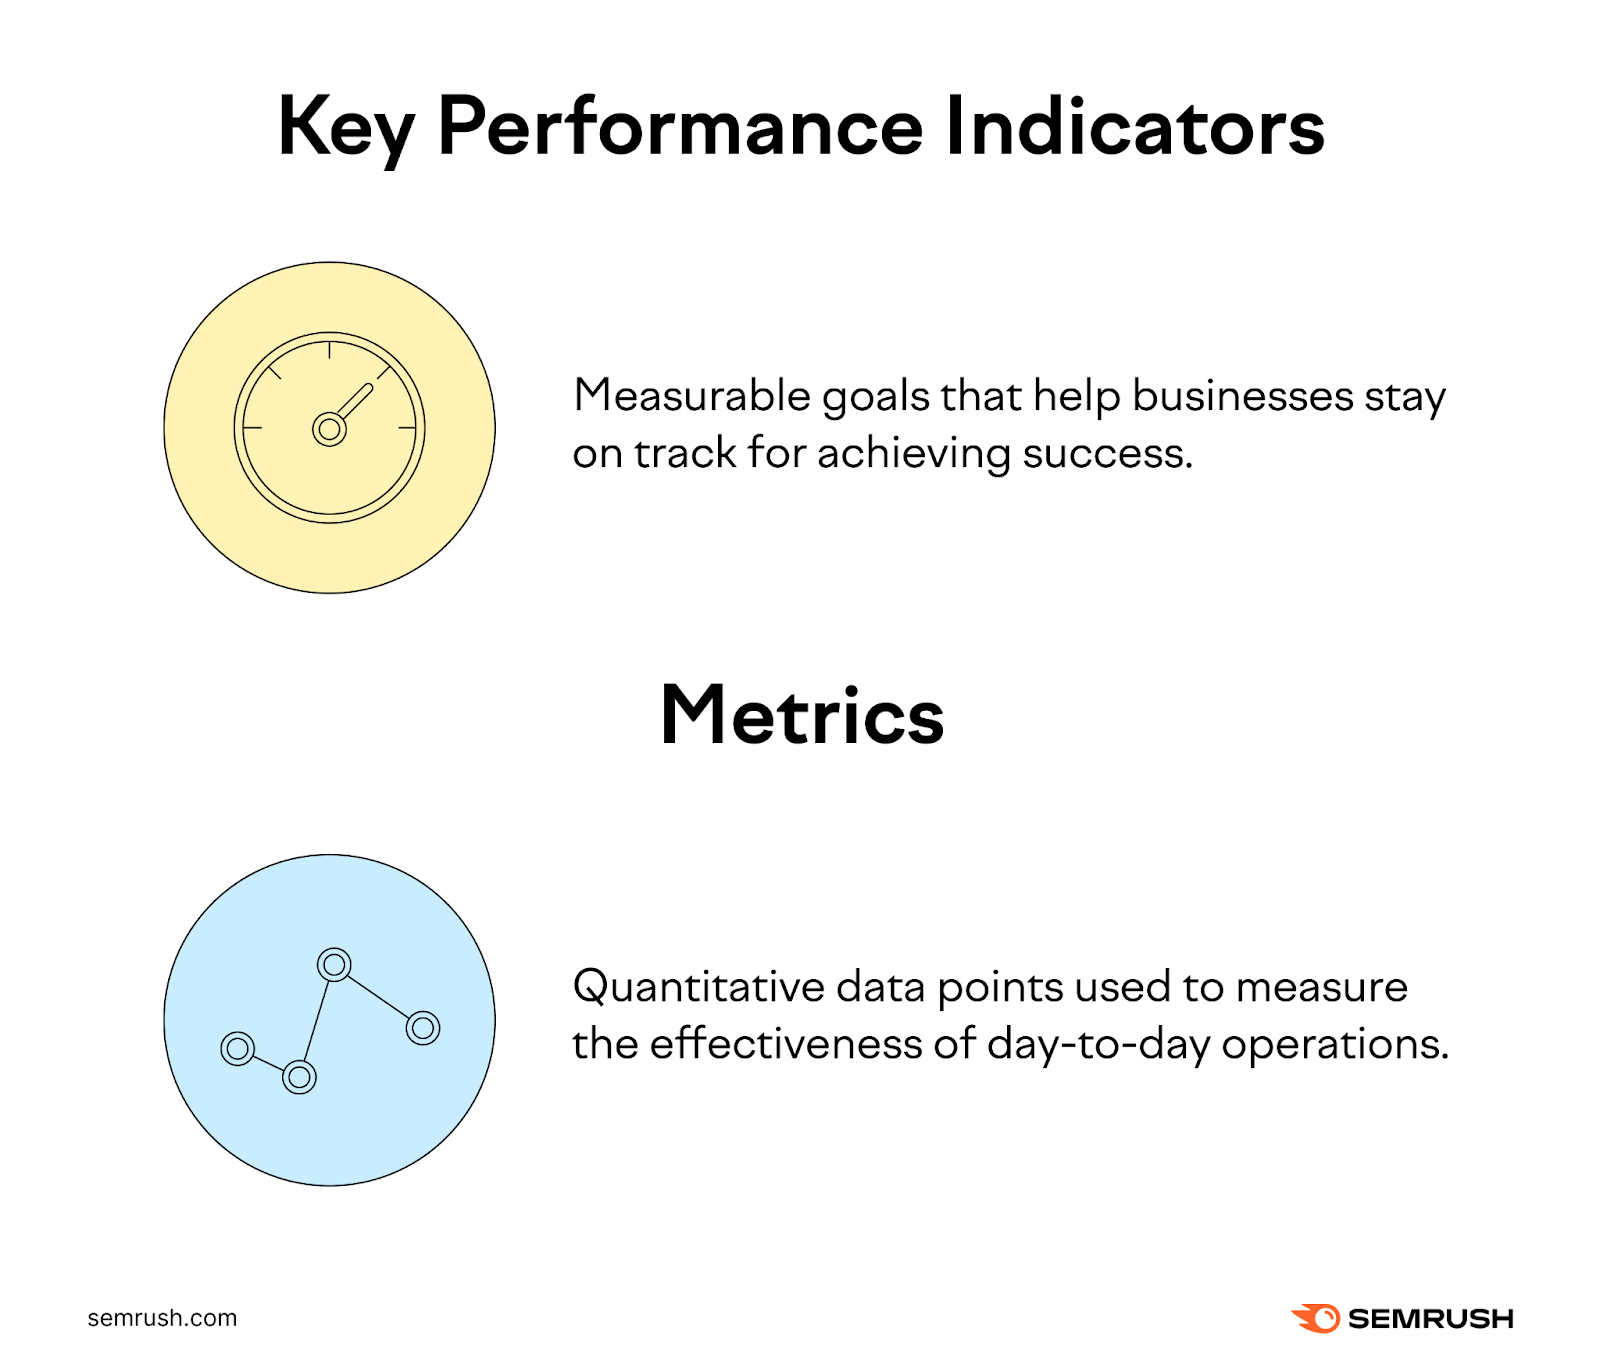 Definition of "Key Performance Indicators" and "Metrics" along with icons for both.